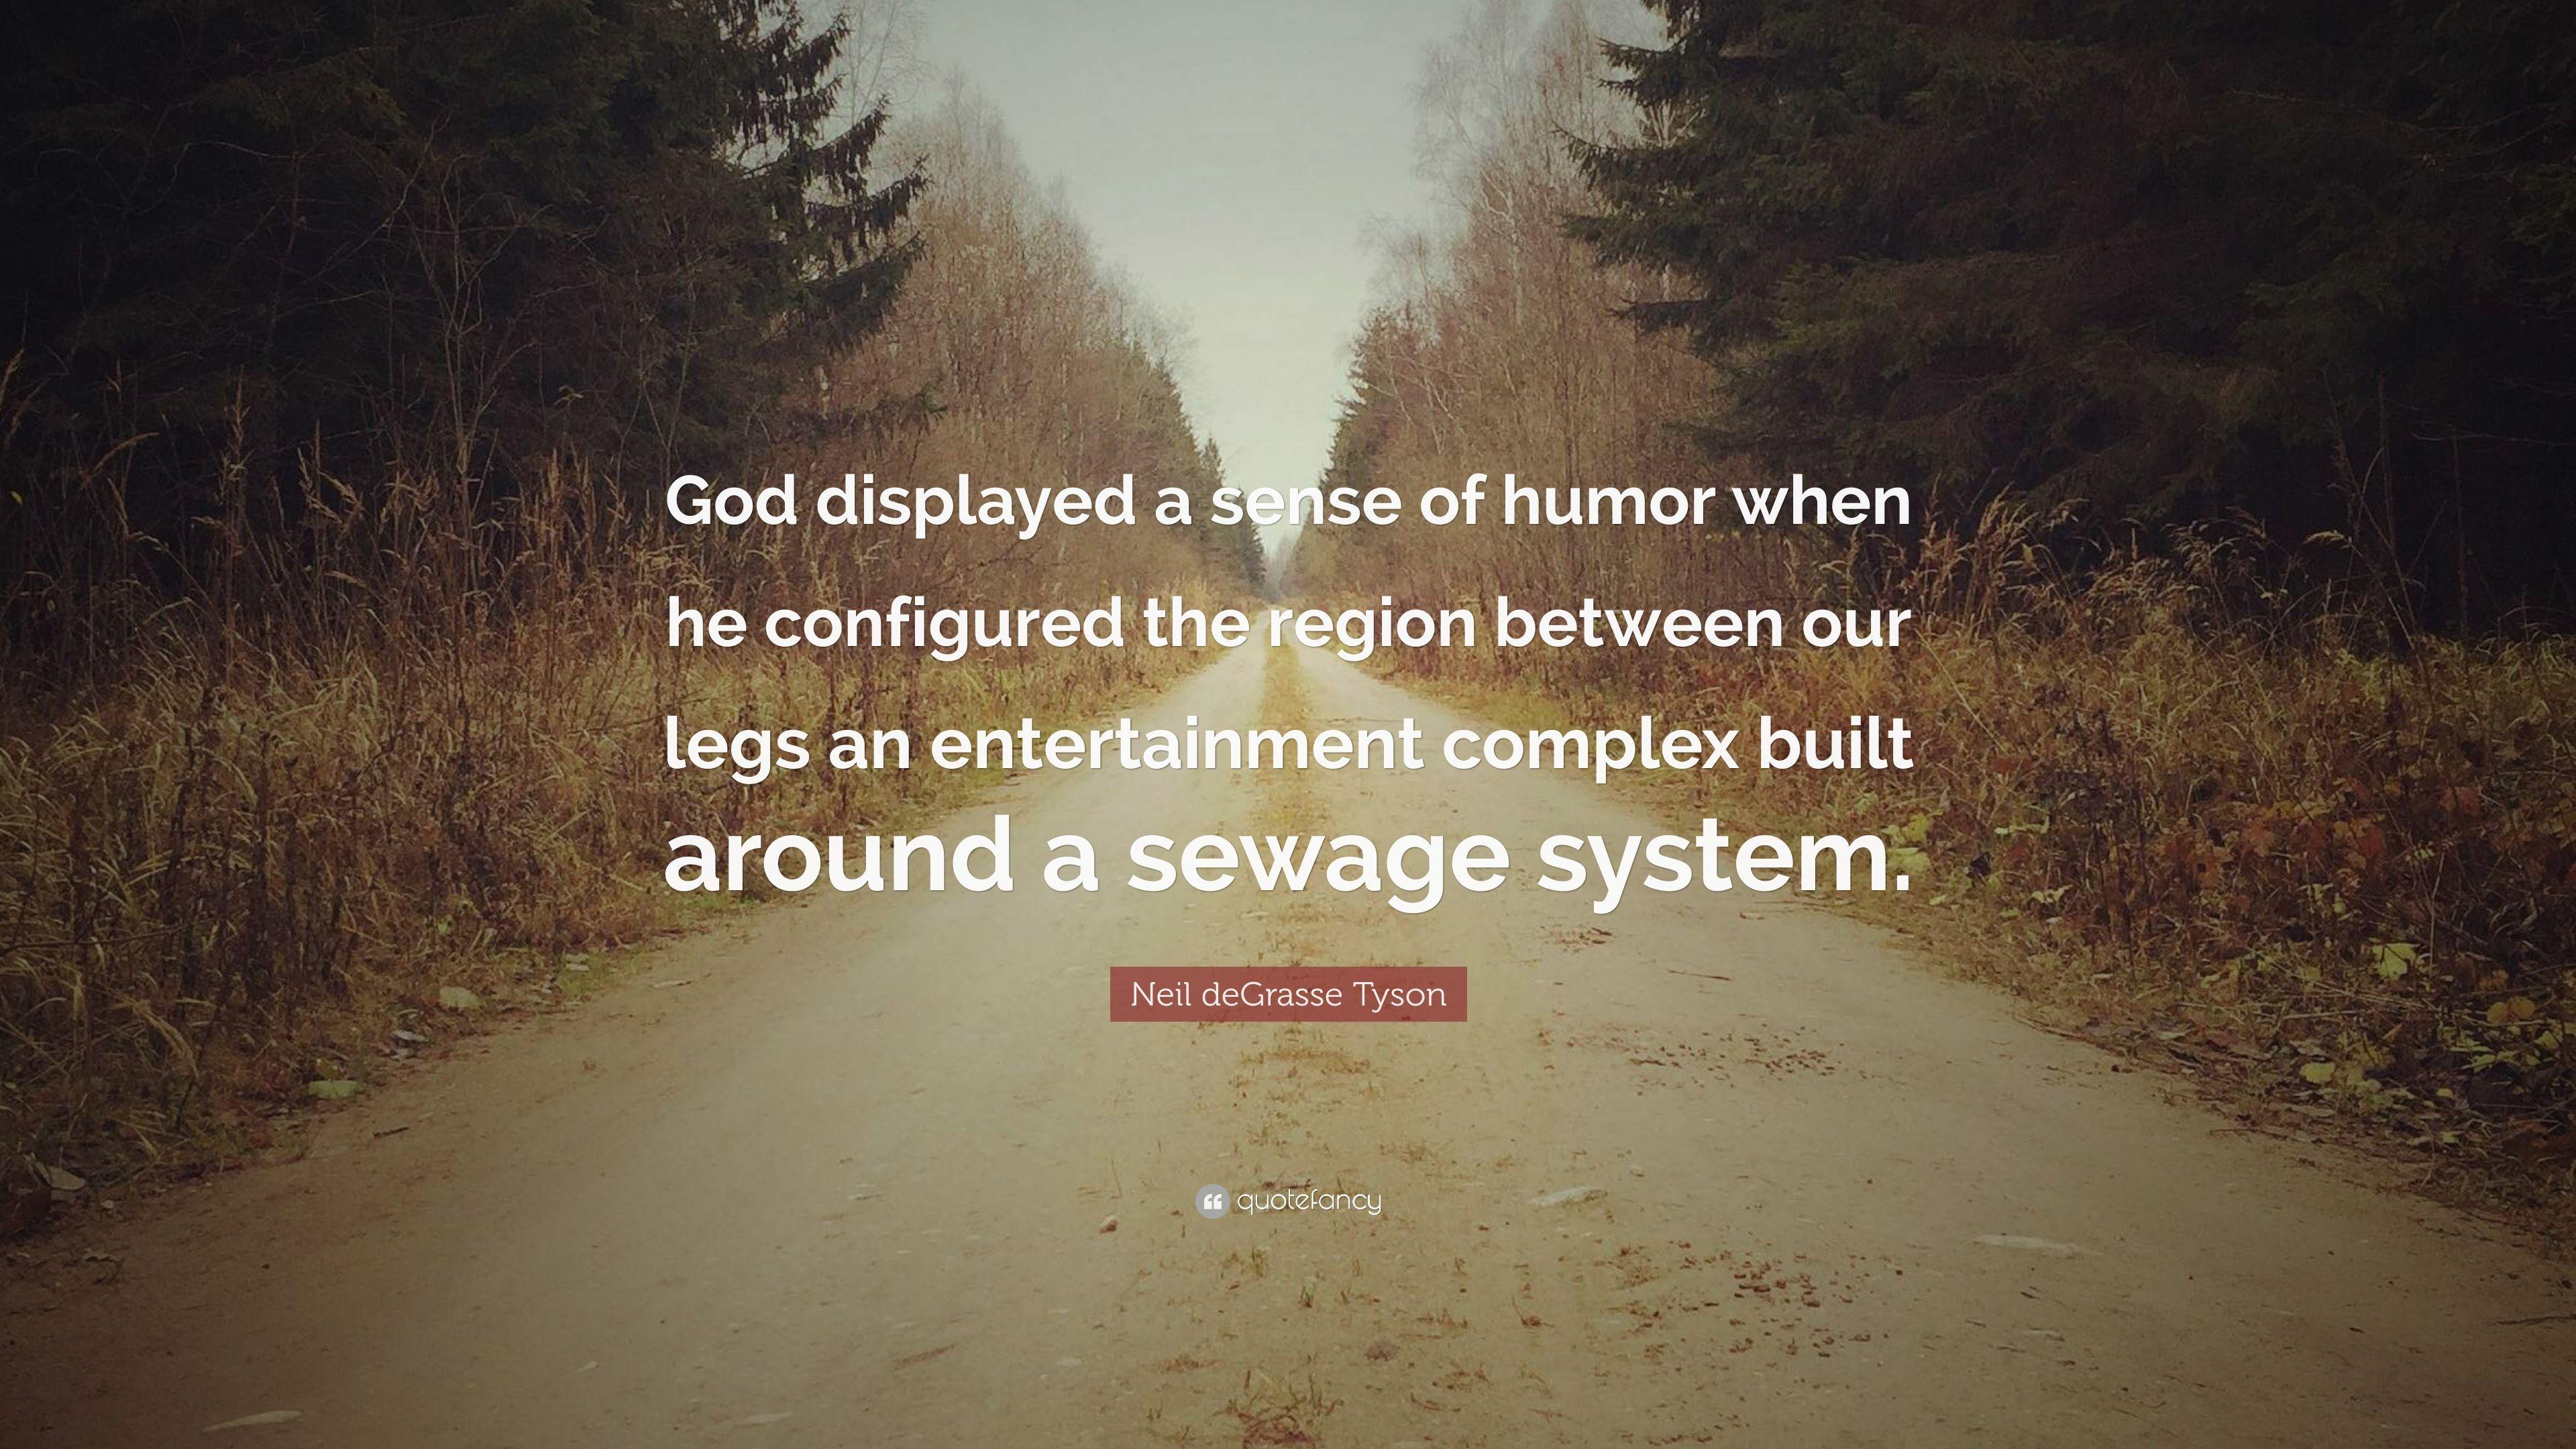 Neil deGrasse Tyson Quote: “God displayed a sense of humor when he